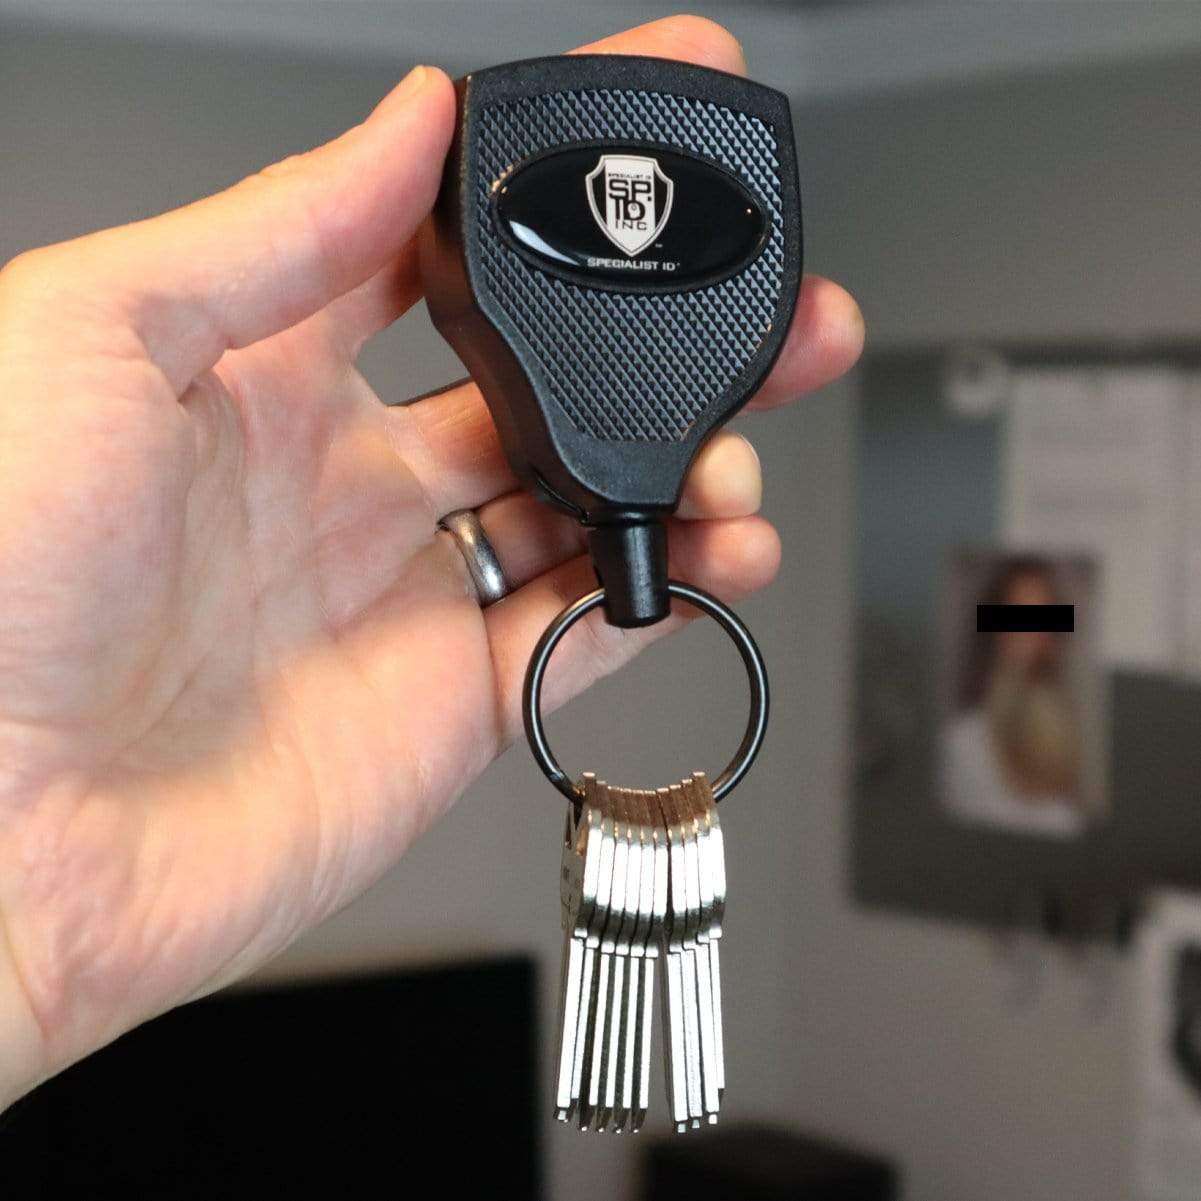 A hand holds a set of keys attached to a Super Heavy Duty Retractable Keychain - 8oz or 10 Keys - Durable 48” (4 Ft) Kevlar Lanyard, featuring an emblem. The background is slightly blurred, showing indistinct objects.